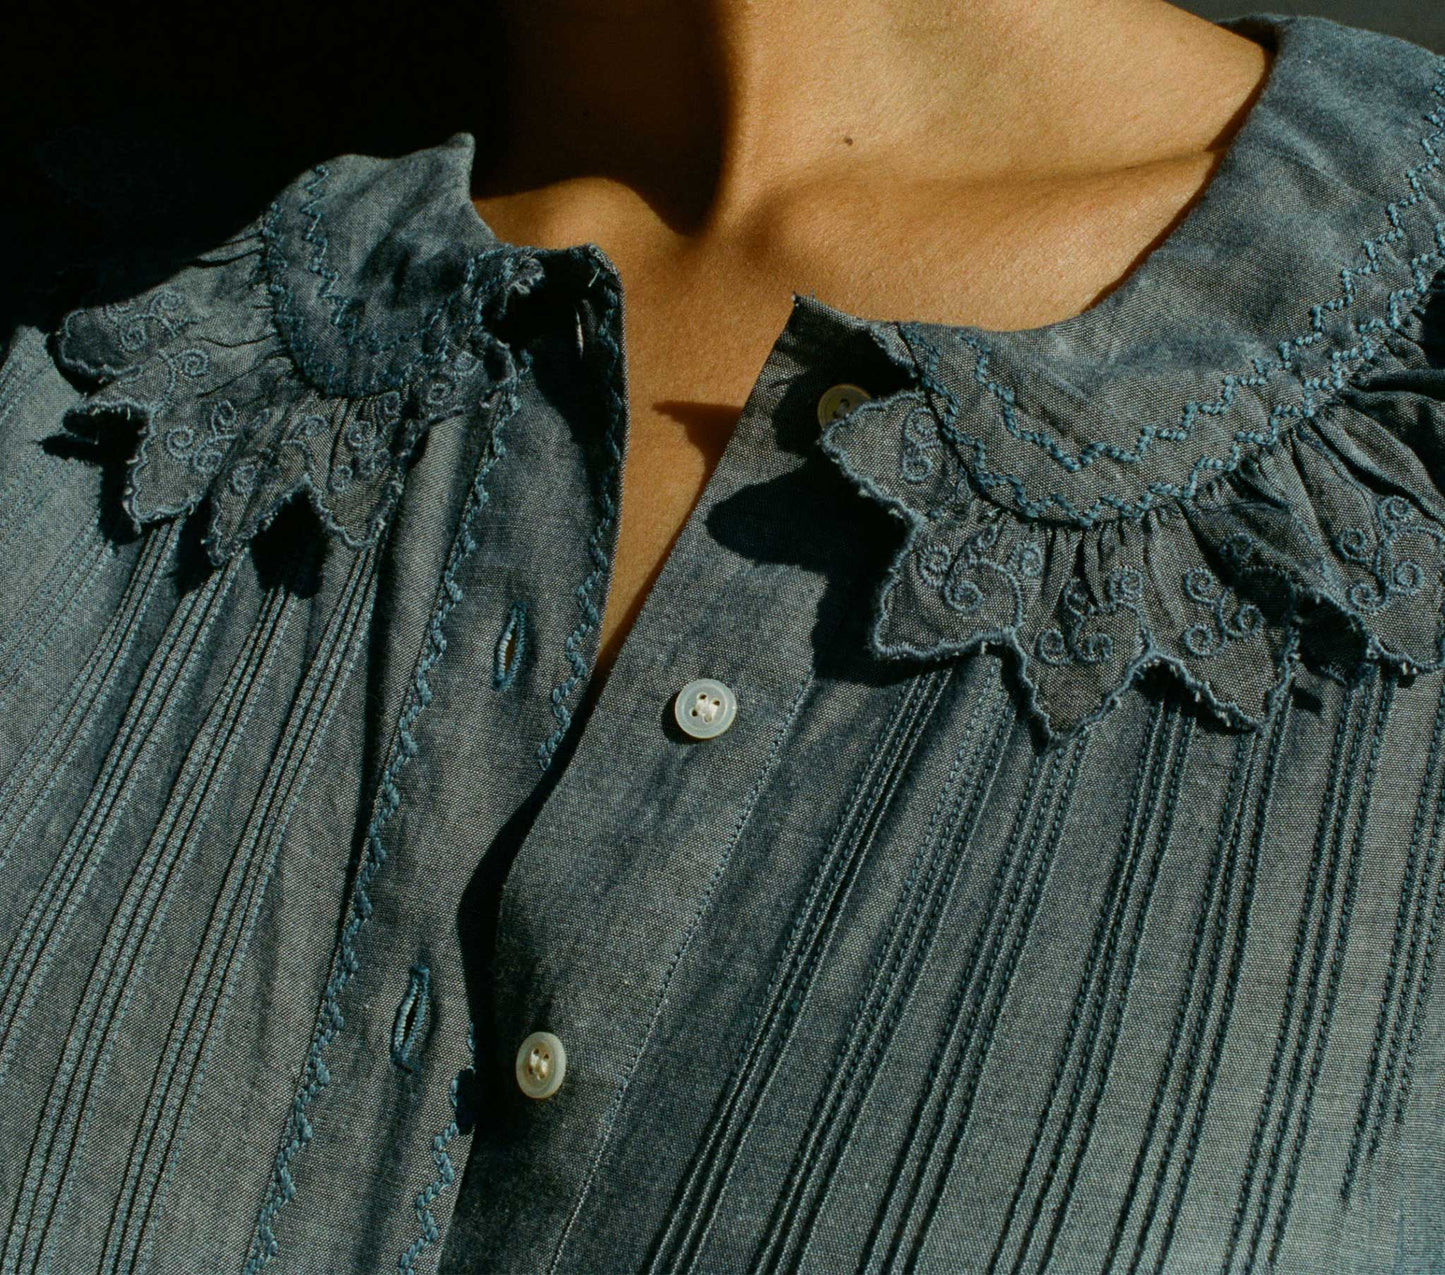 HICKORY TOP -- BLUE CHAMBRAY